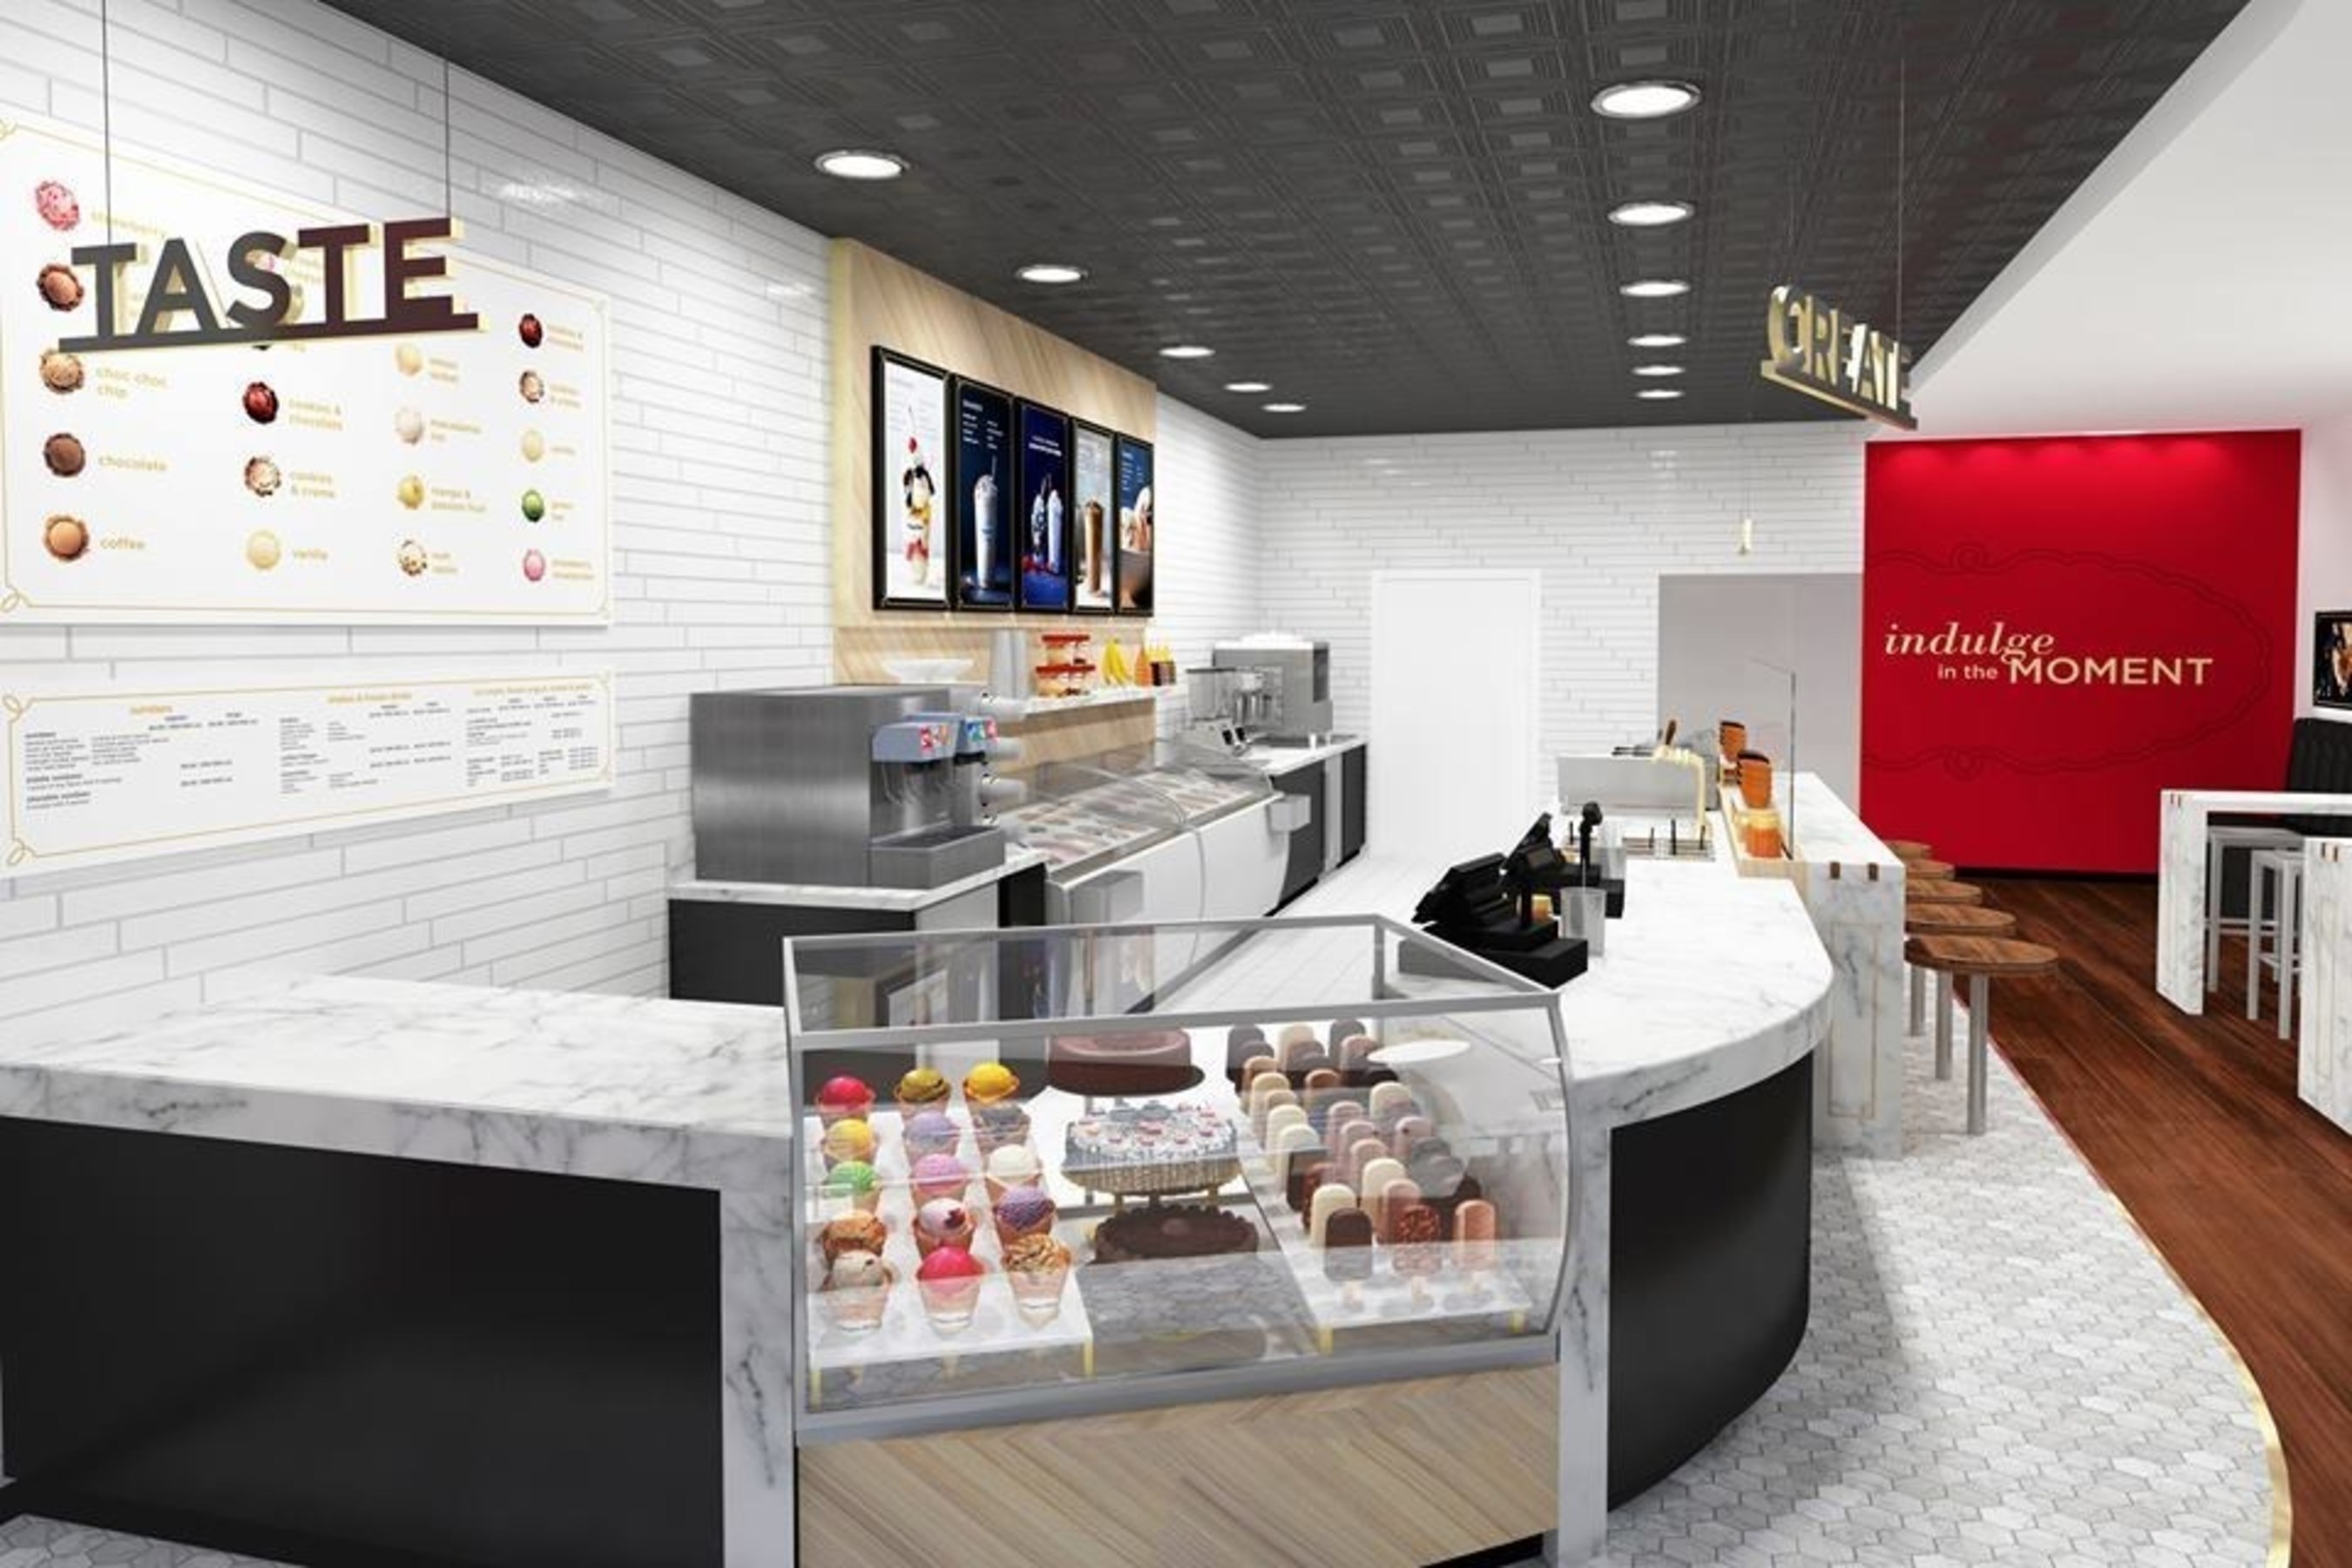 The Haagen-Dazs Shop Company Premieres an Exciting, New Shop Design